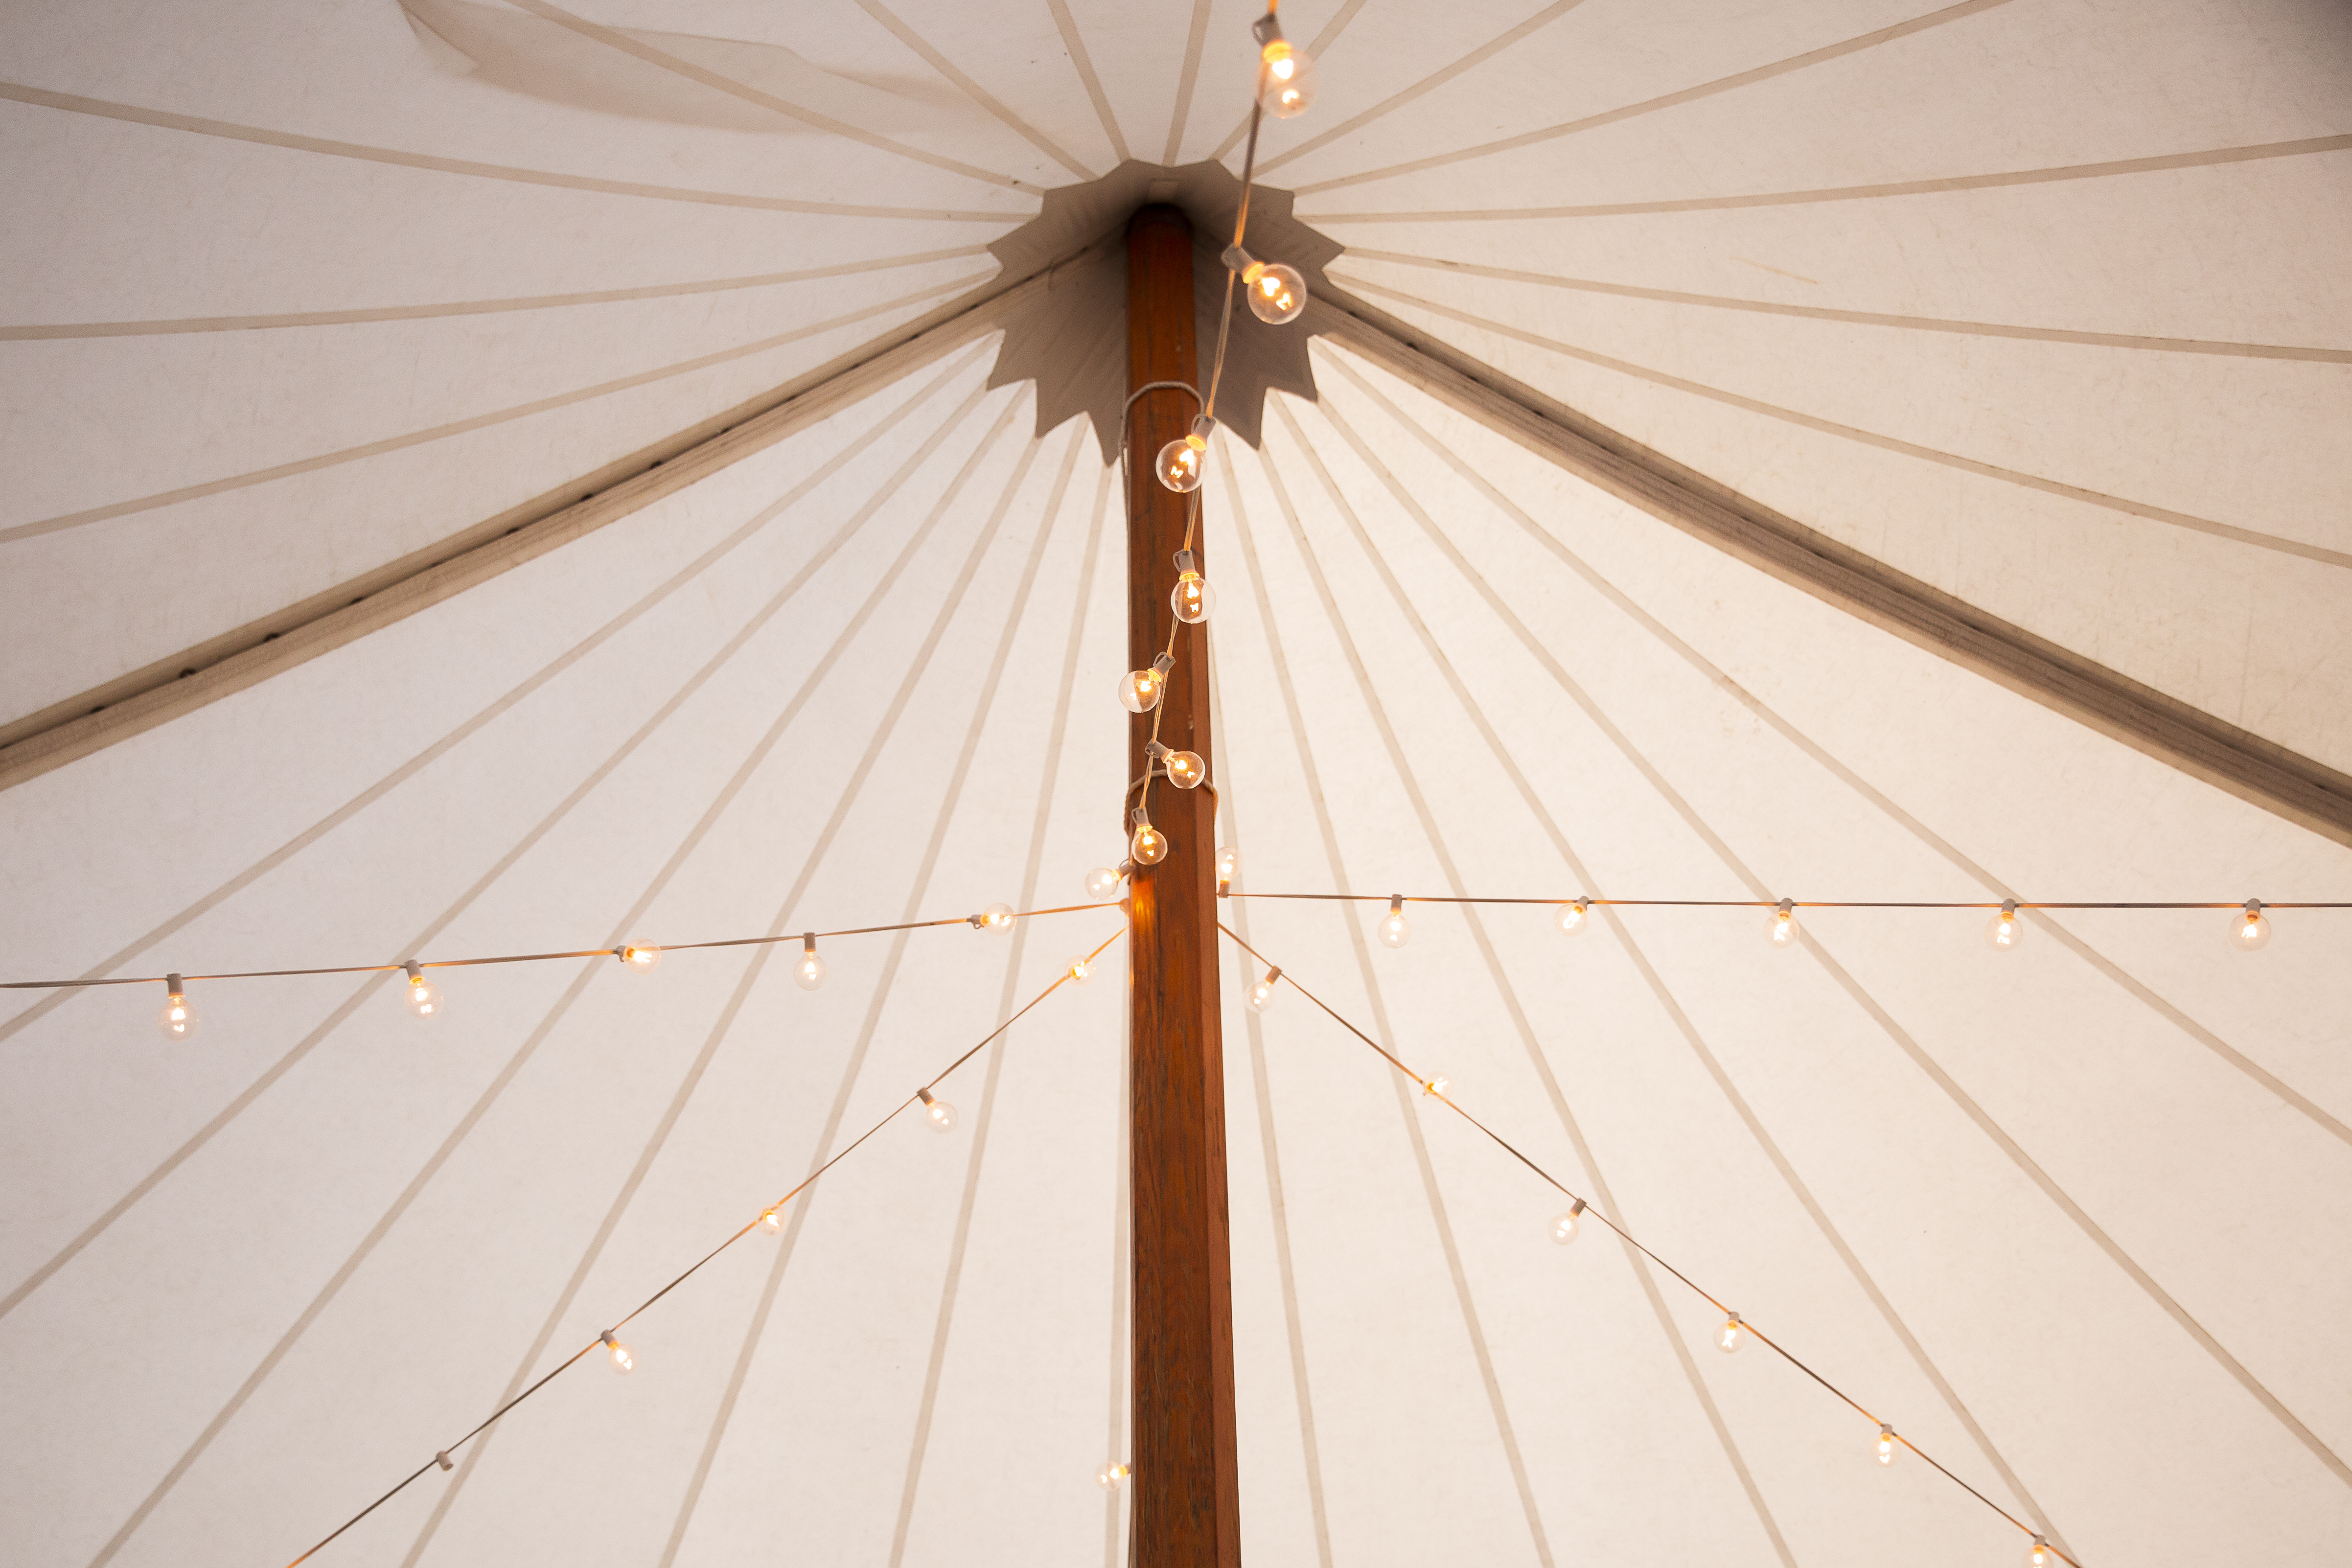 Bistro Lighting in a Sailcloth Tent